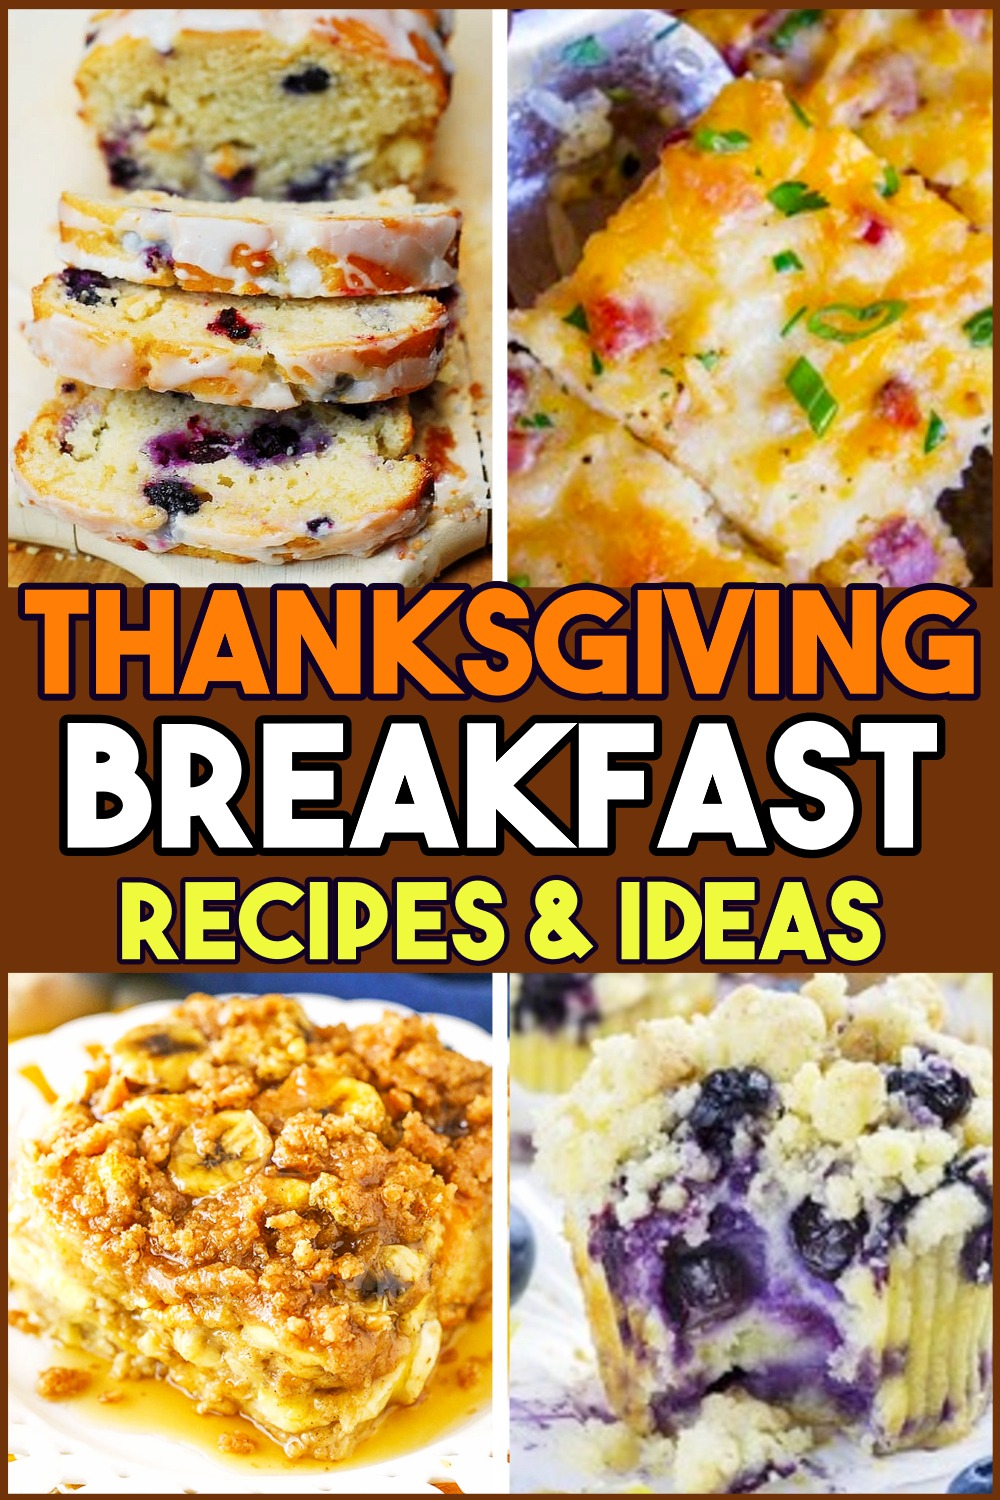 Thanksgiving brunch and Thanksgiving breakfast ideas - fall breakfast ideas, Thanksgiving morning breakfast casserole ideas and fall brunch ideas for Thanksgiving morning or make ahead for Black Friday morning girls weekend of shopping.  Quick and easy sweet Thanksgiving breakfast recipes for two or for a crowd - the french toast casserole is like having dessert for breakfast!